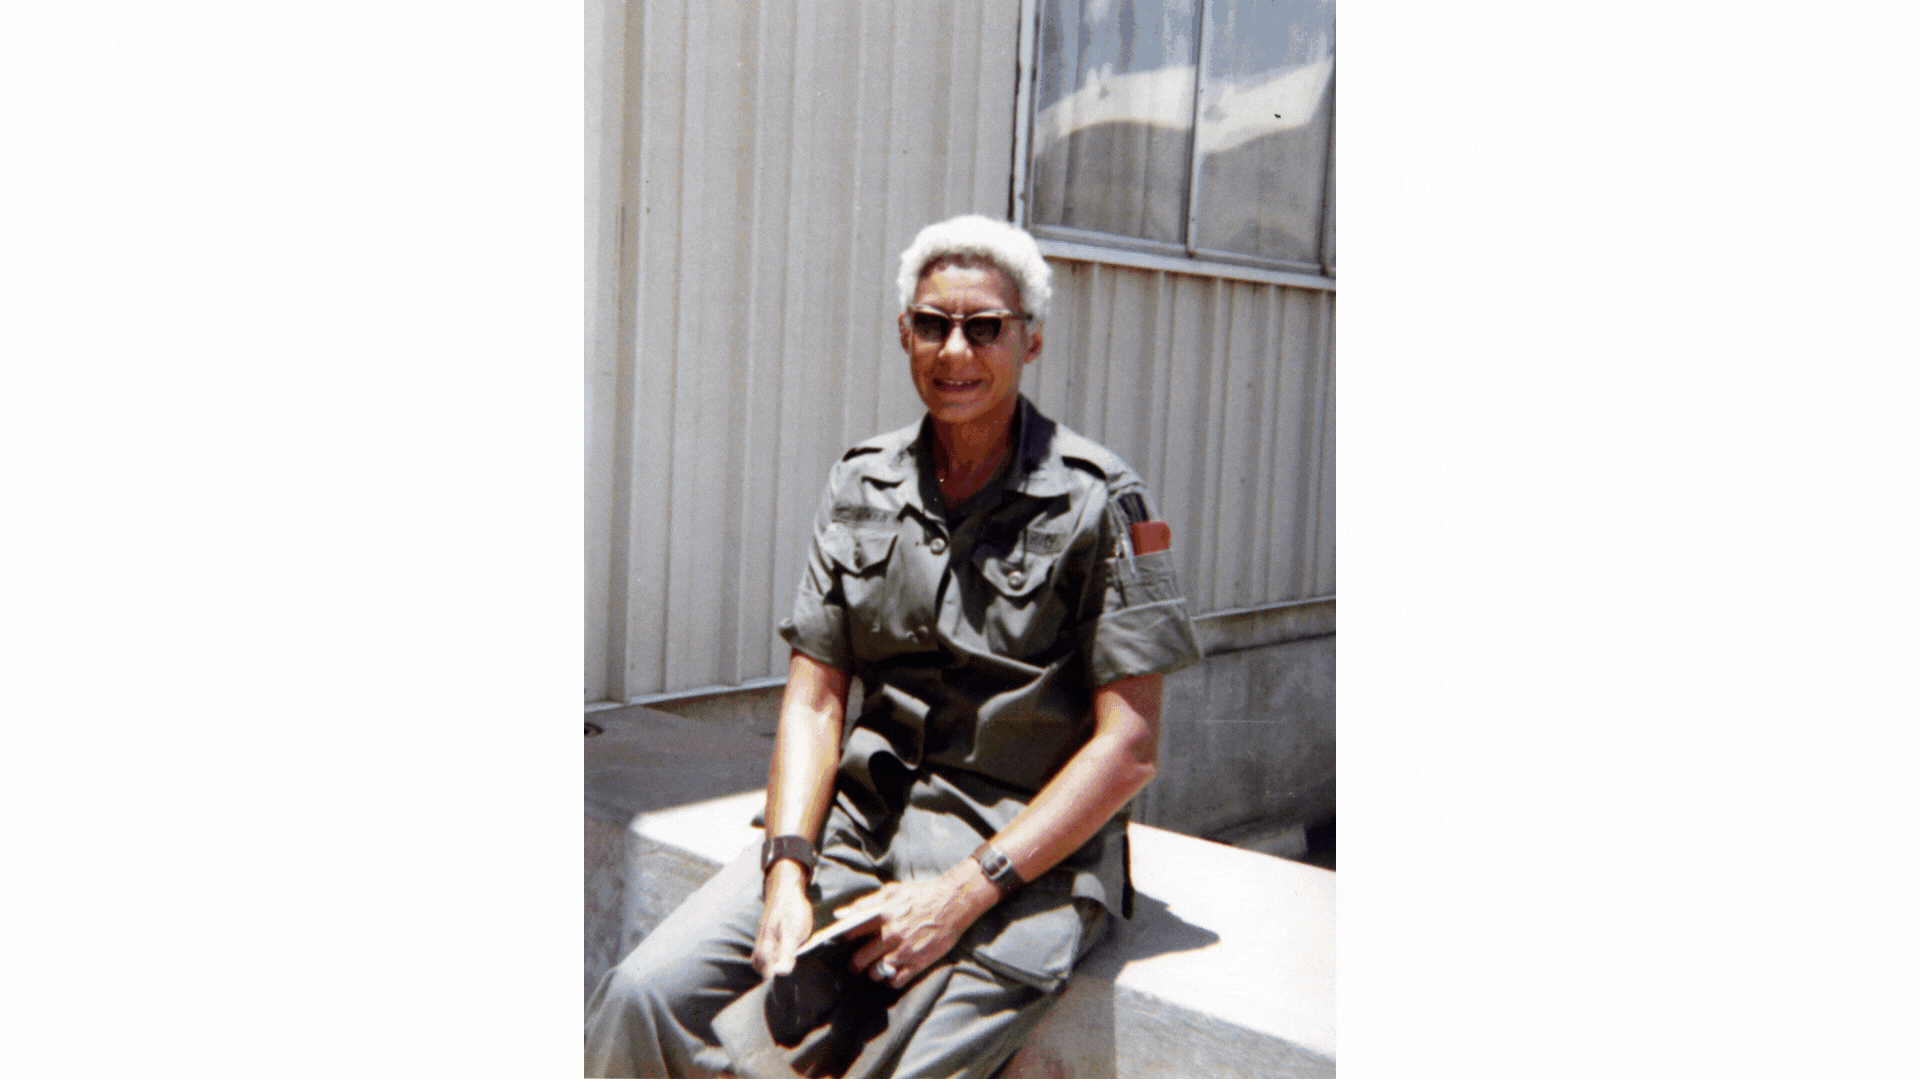 Images of Clotilde Bowen throughout her military and medical career